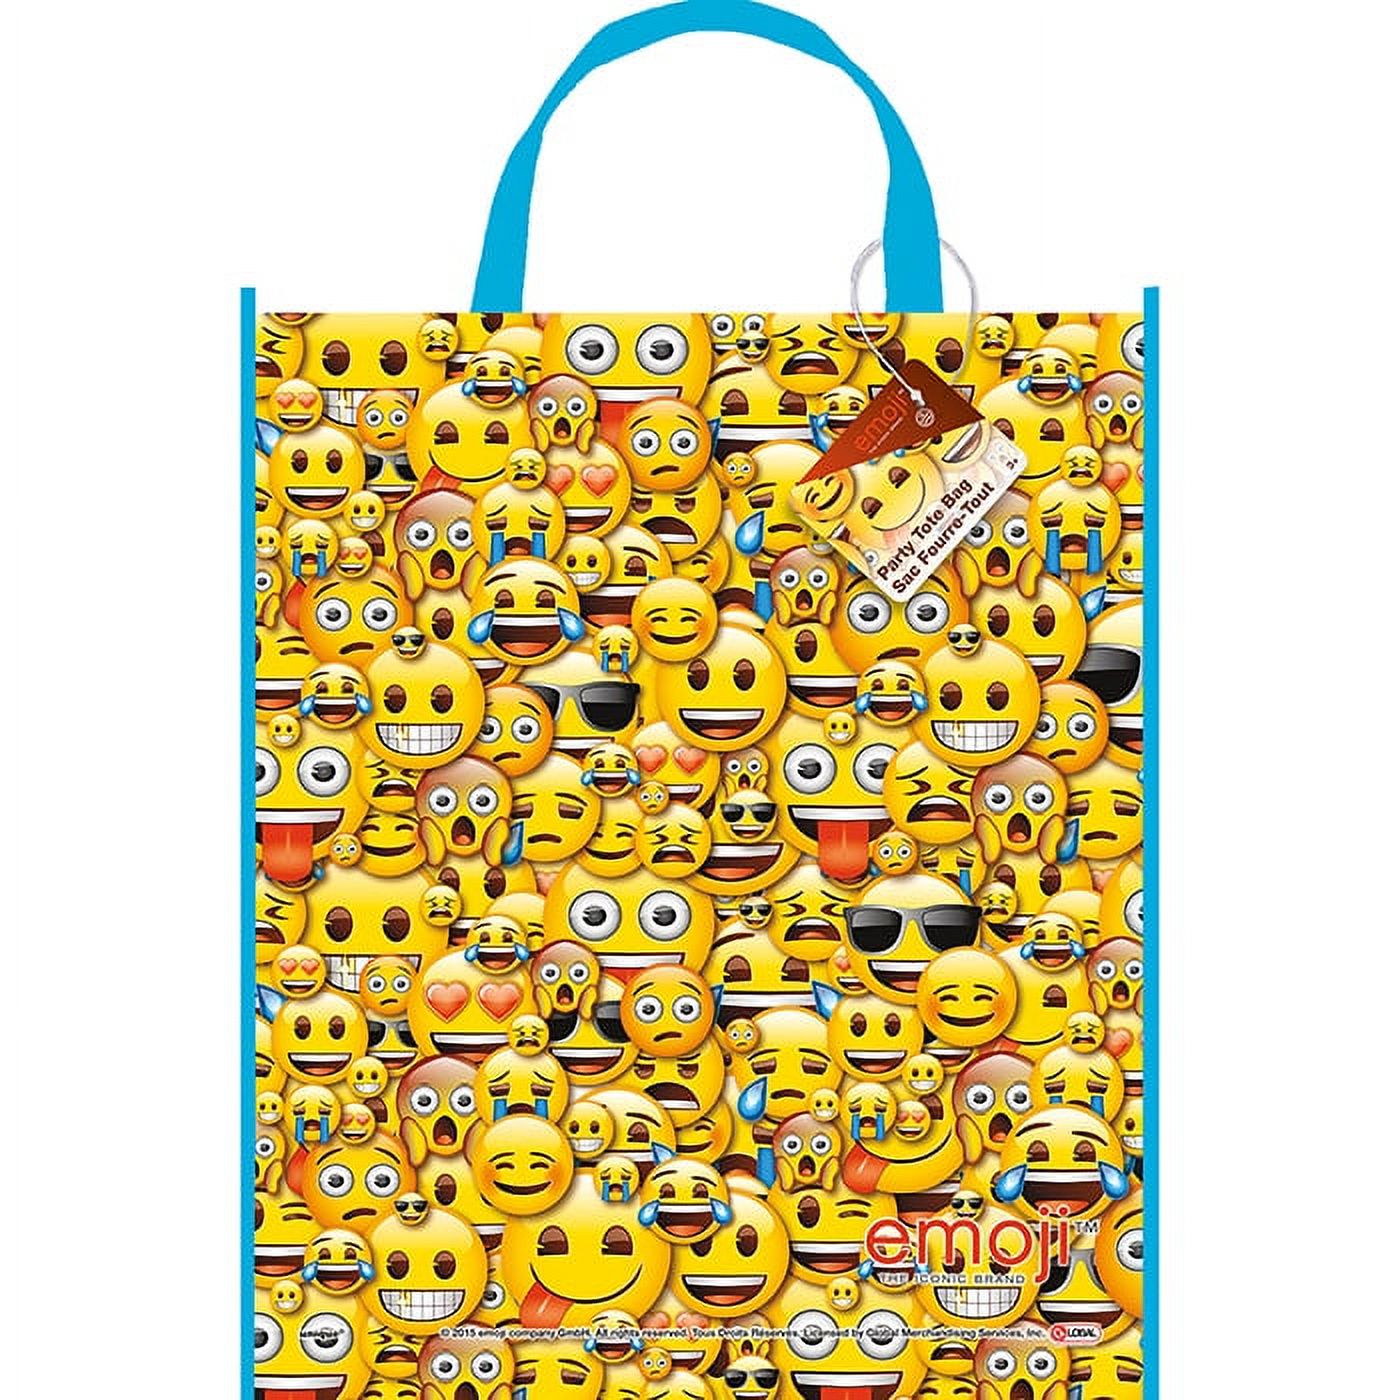 Unique Industries Emoji Birthday Party Bags - image 1 of 3